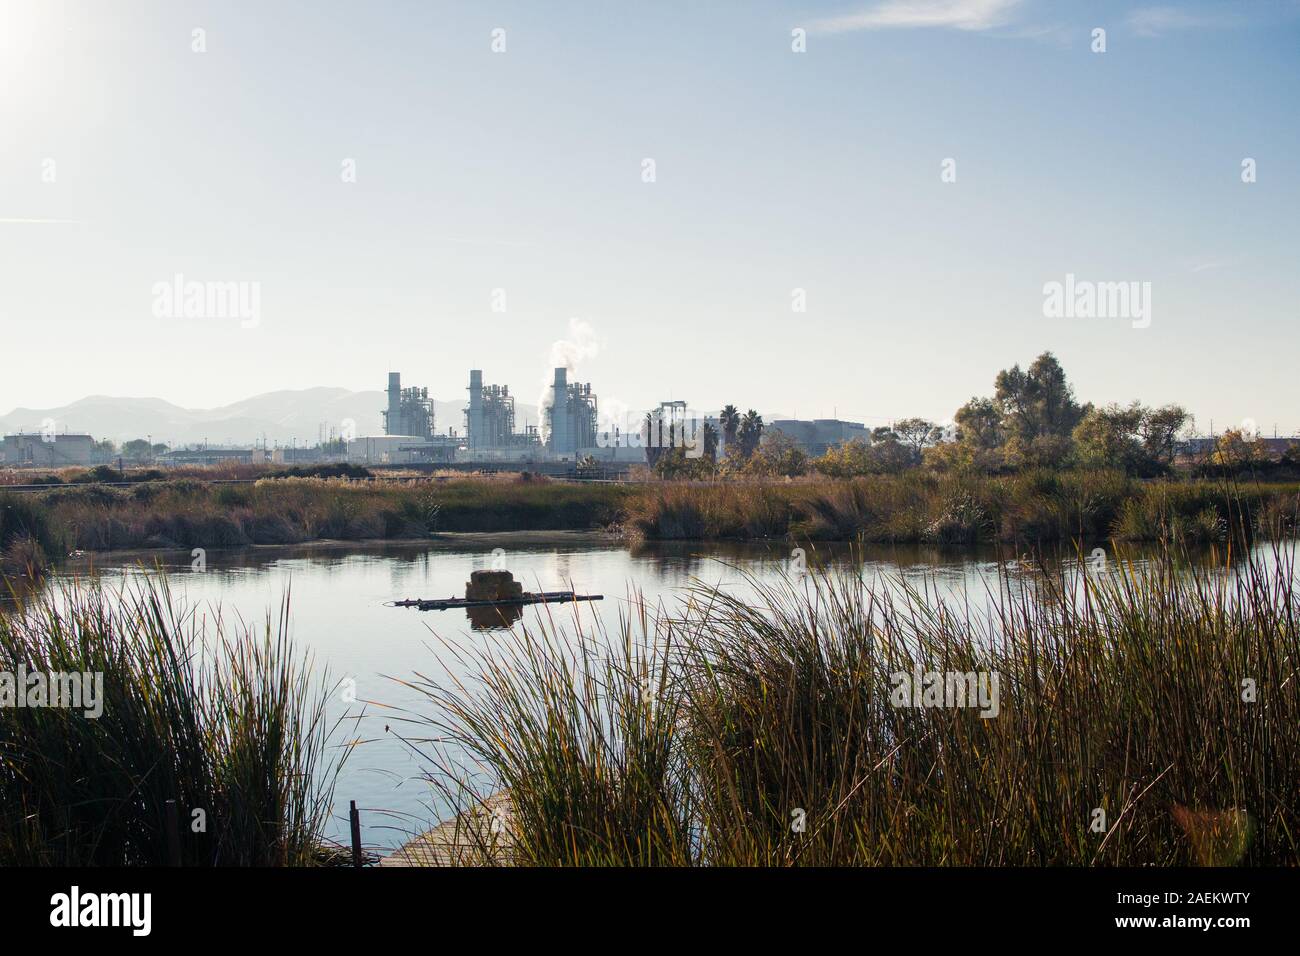 Nature reserve at the Dow wetlands with three incongruous industrial chemical plant buildings dominating the skyline in an otherwise rural landscape Stock Photo